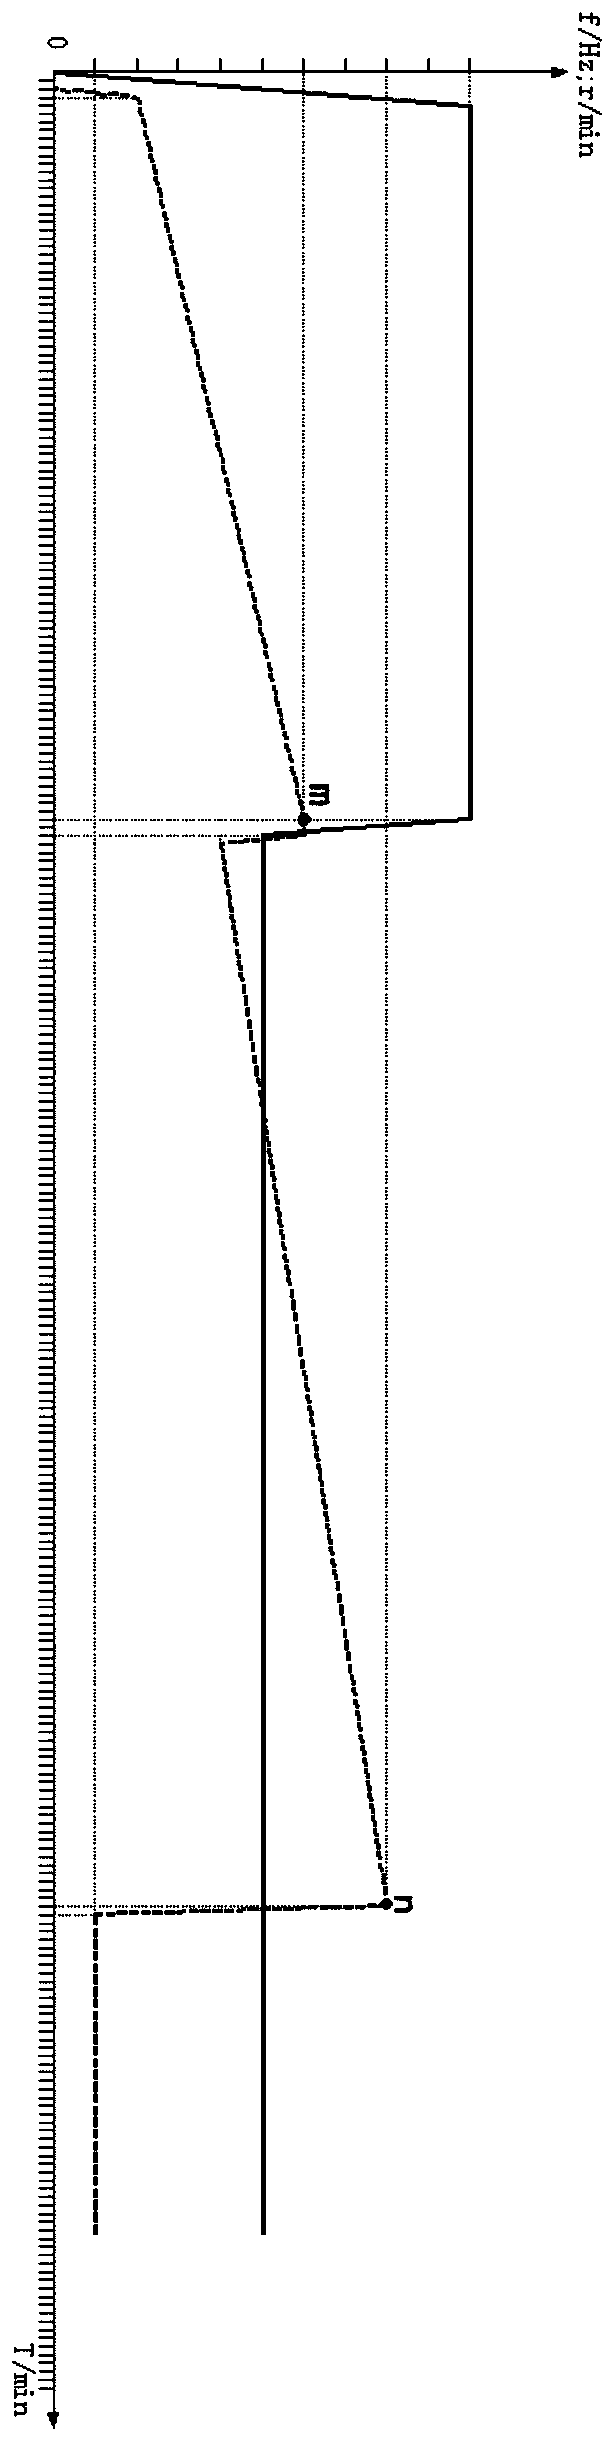 Control method of frequency conversion air conditioner